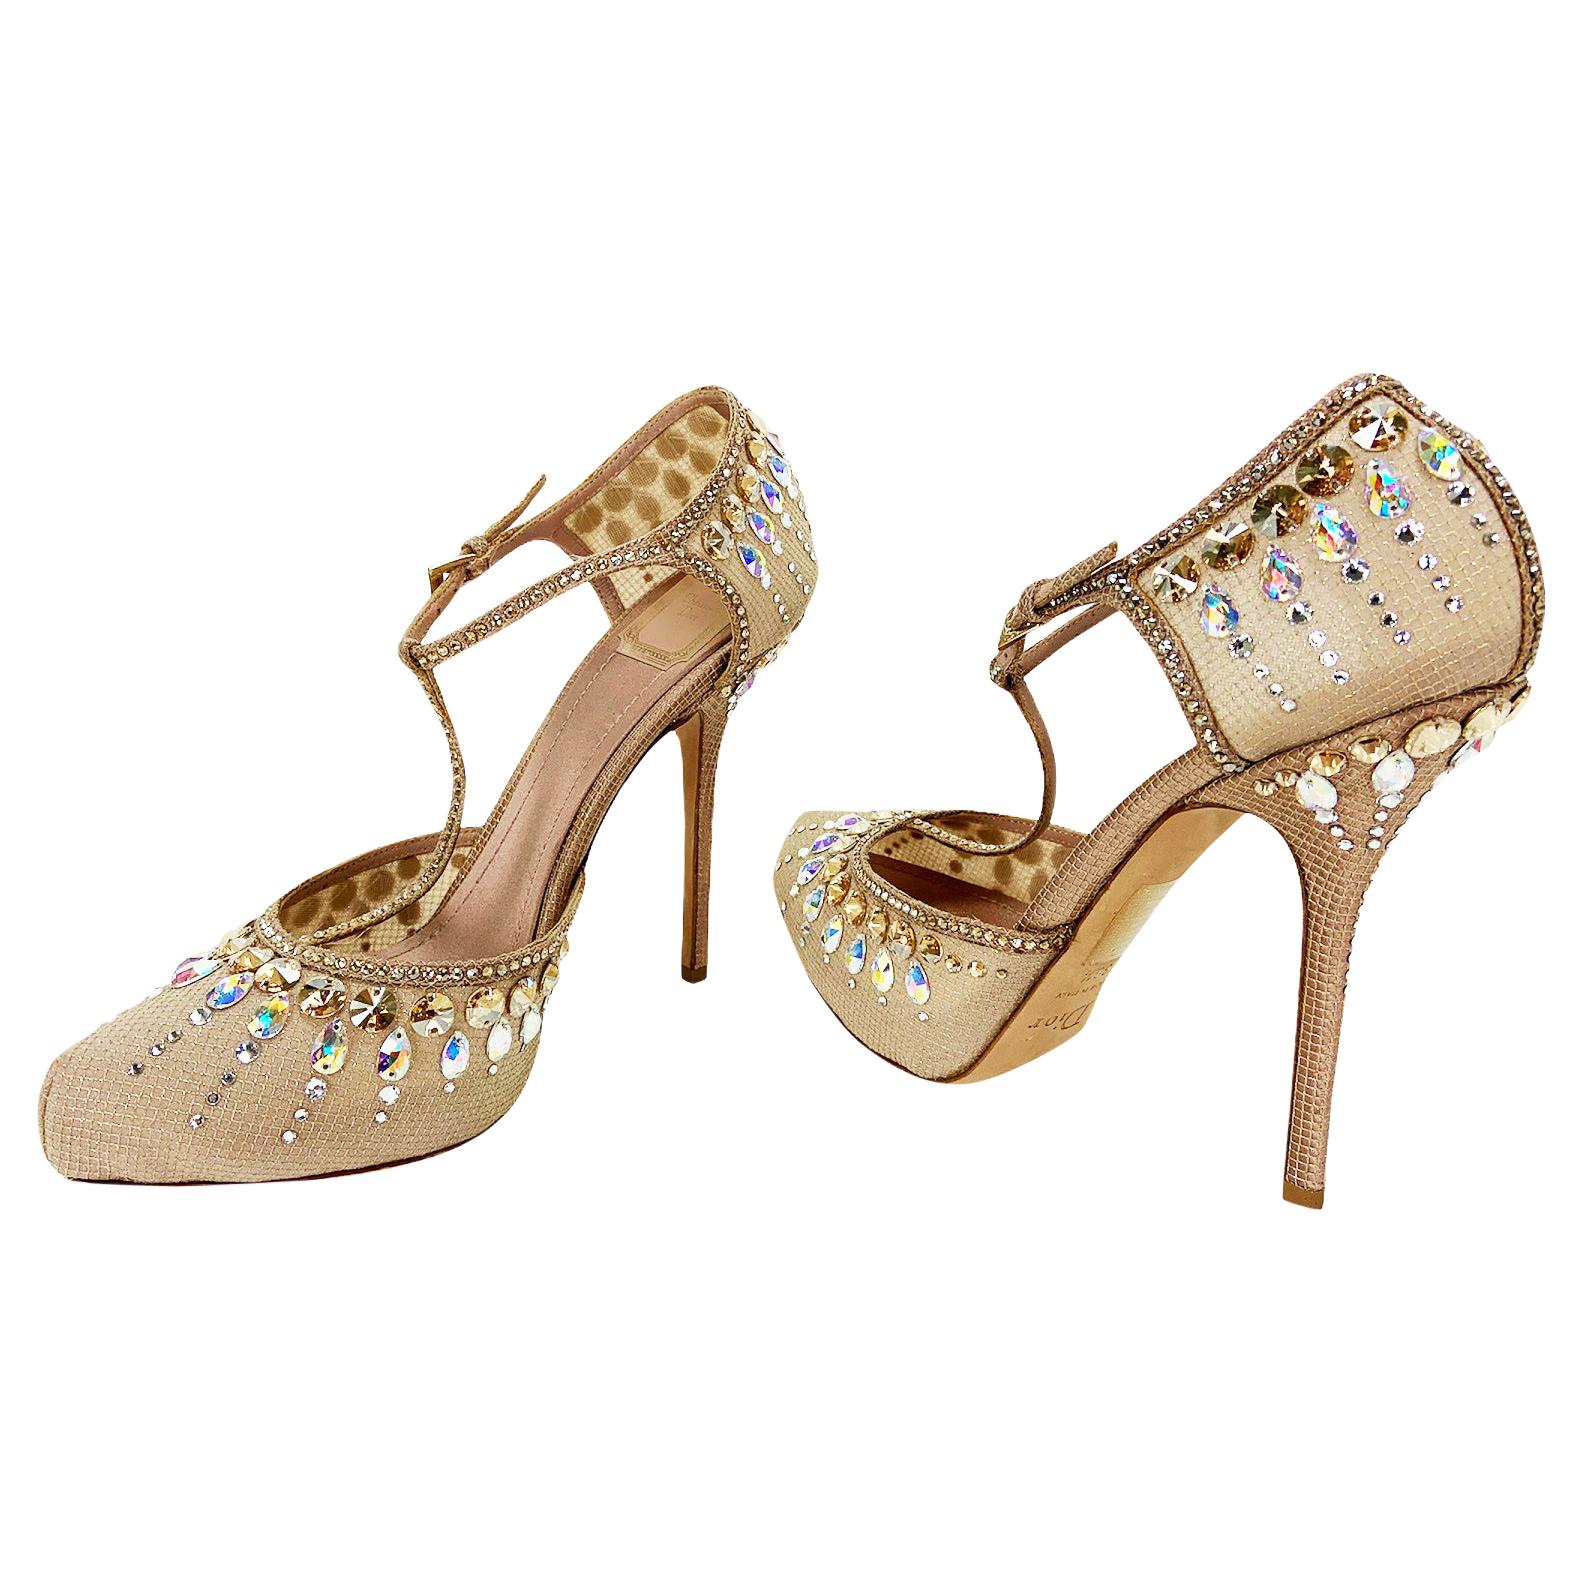 New Christian Dior Nude Crystal Embellished T-strap Shoes Pumps 39.5 